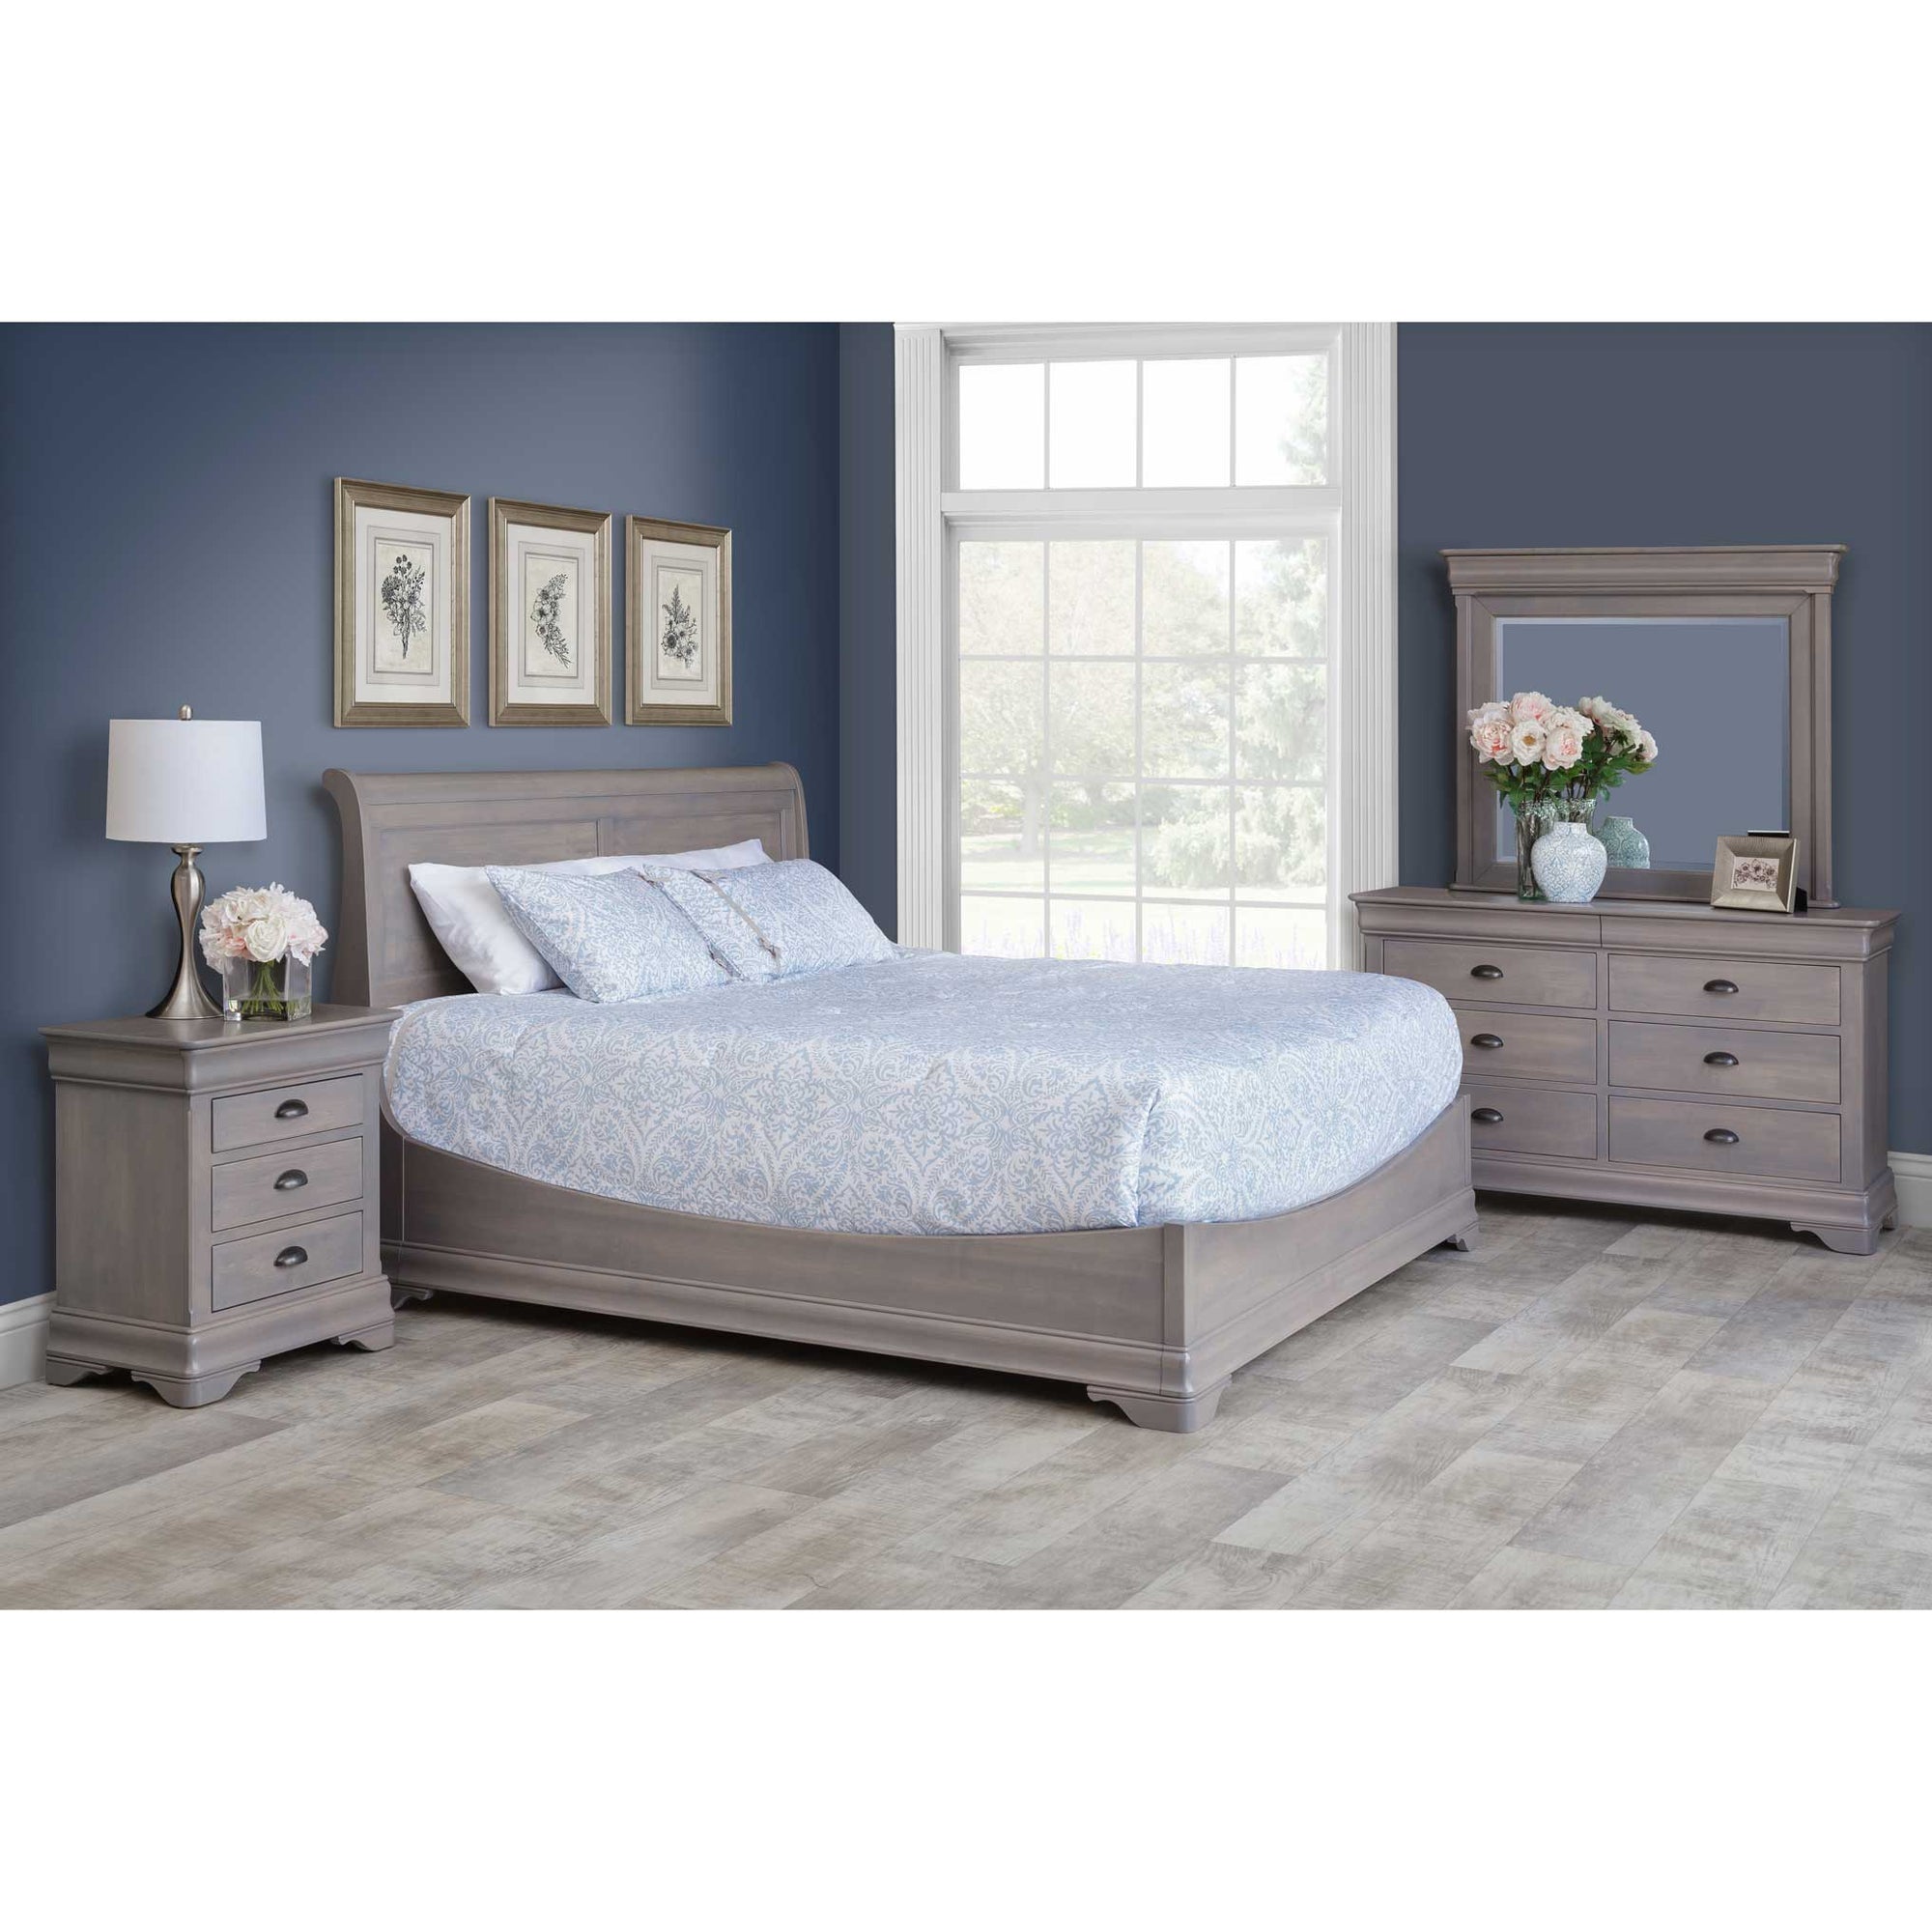 Amish Marseilles 3pc Maple Wood Panel Queen Bedroom Set - snyders.furniture